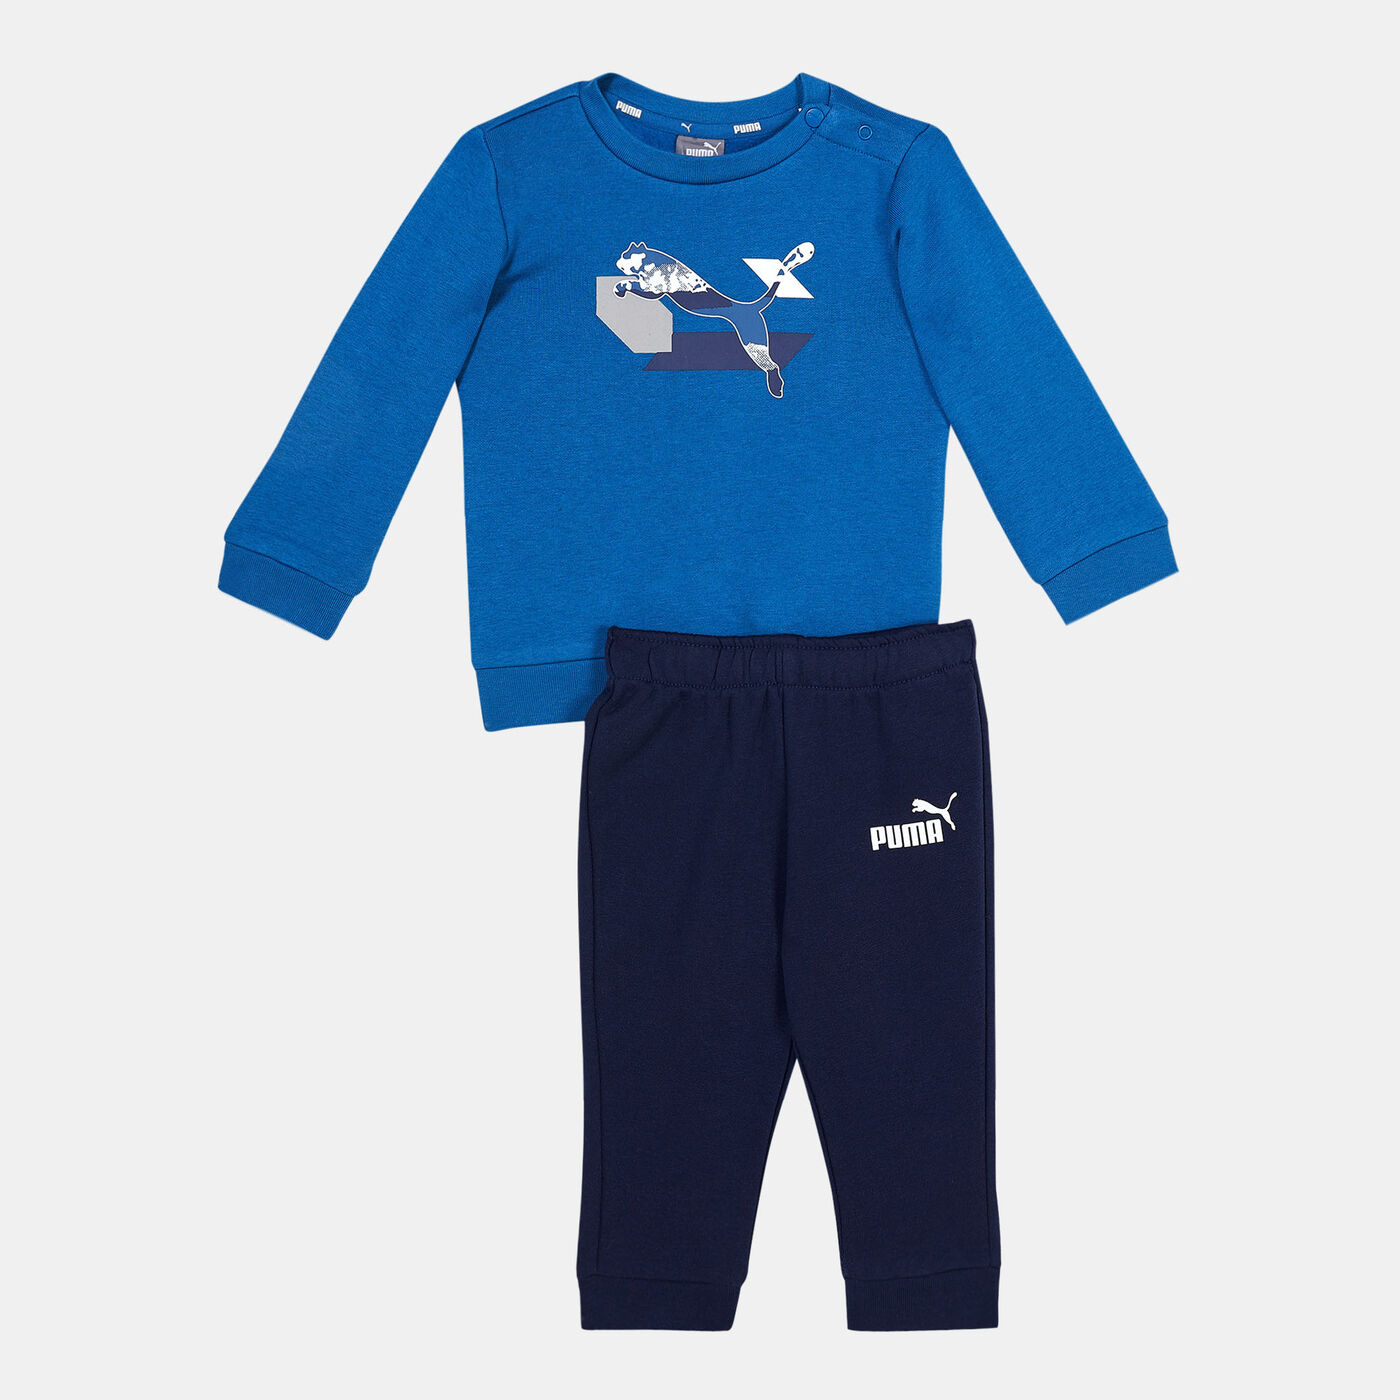  Kids' Minicats Power Sweatshirt and Sweatpants Set (Baby and Toddlers)